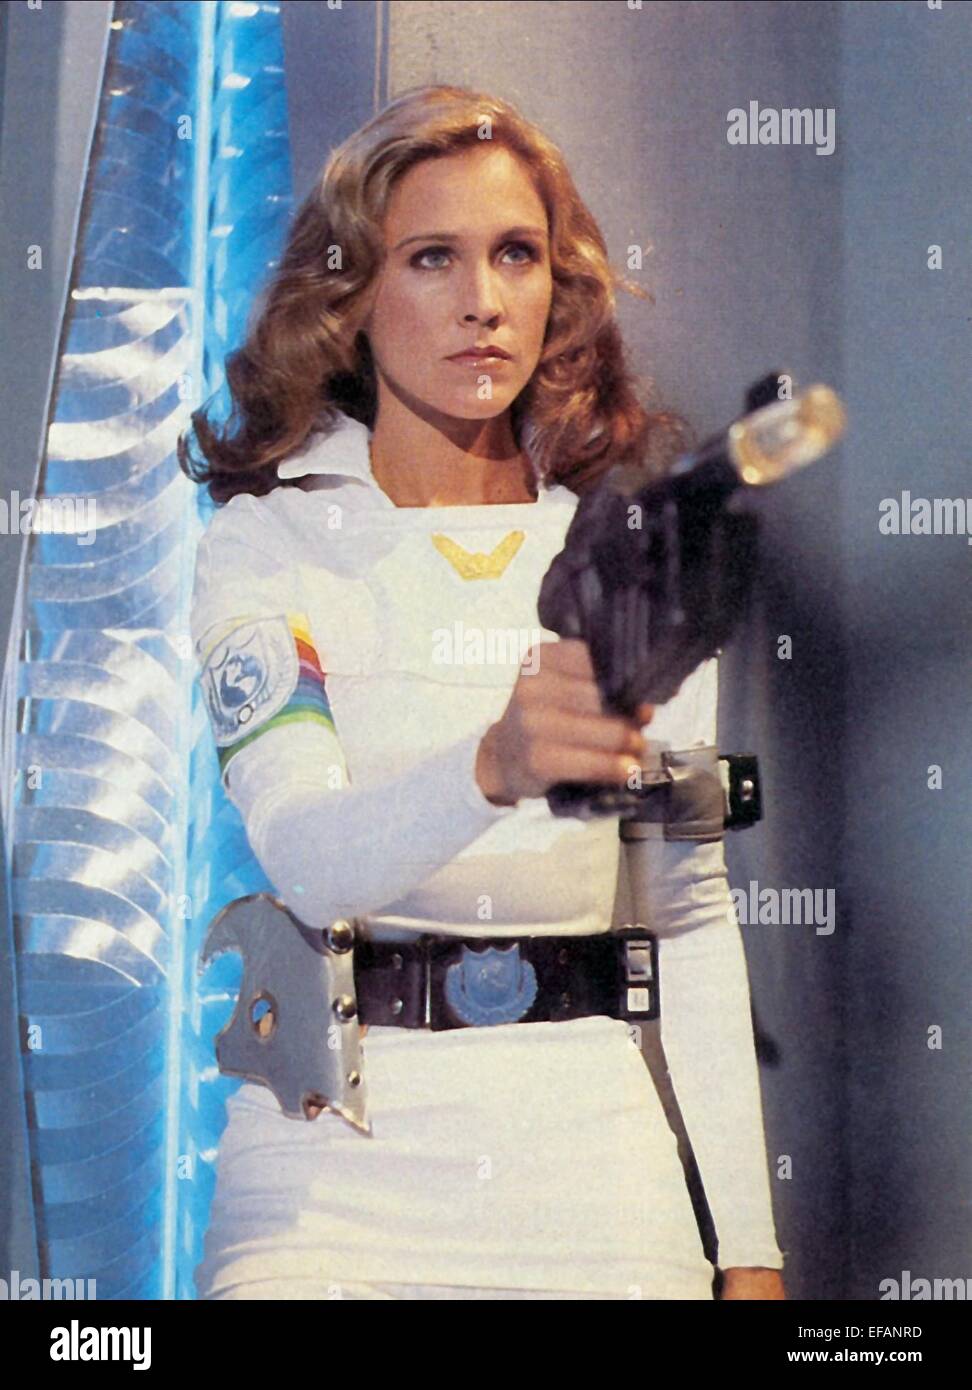 Hakes - BUCK ROGERS IN THE 25th CENTURY SCREEN-WORN 